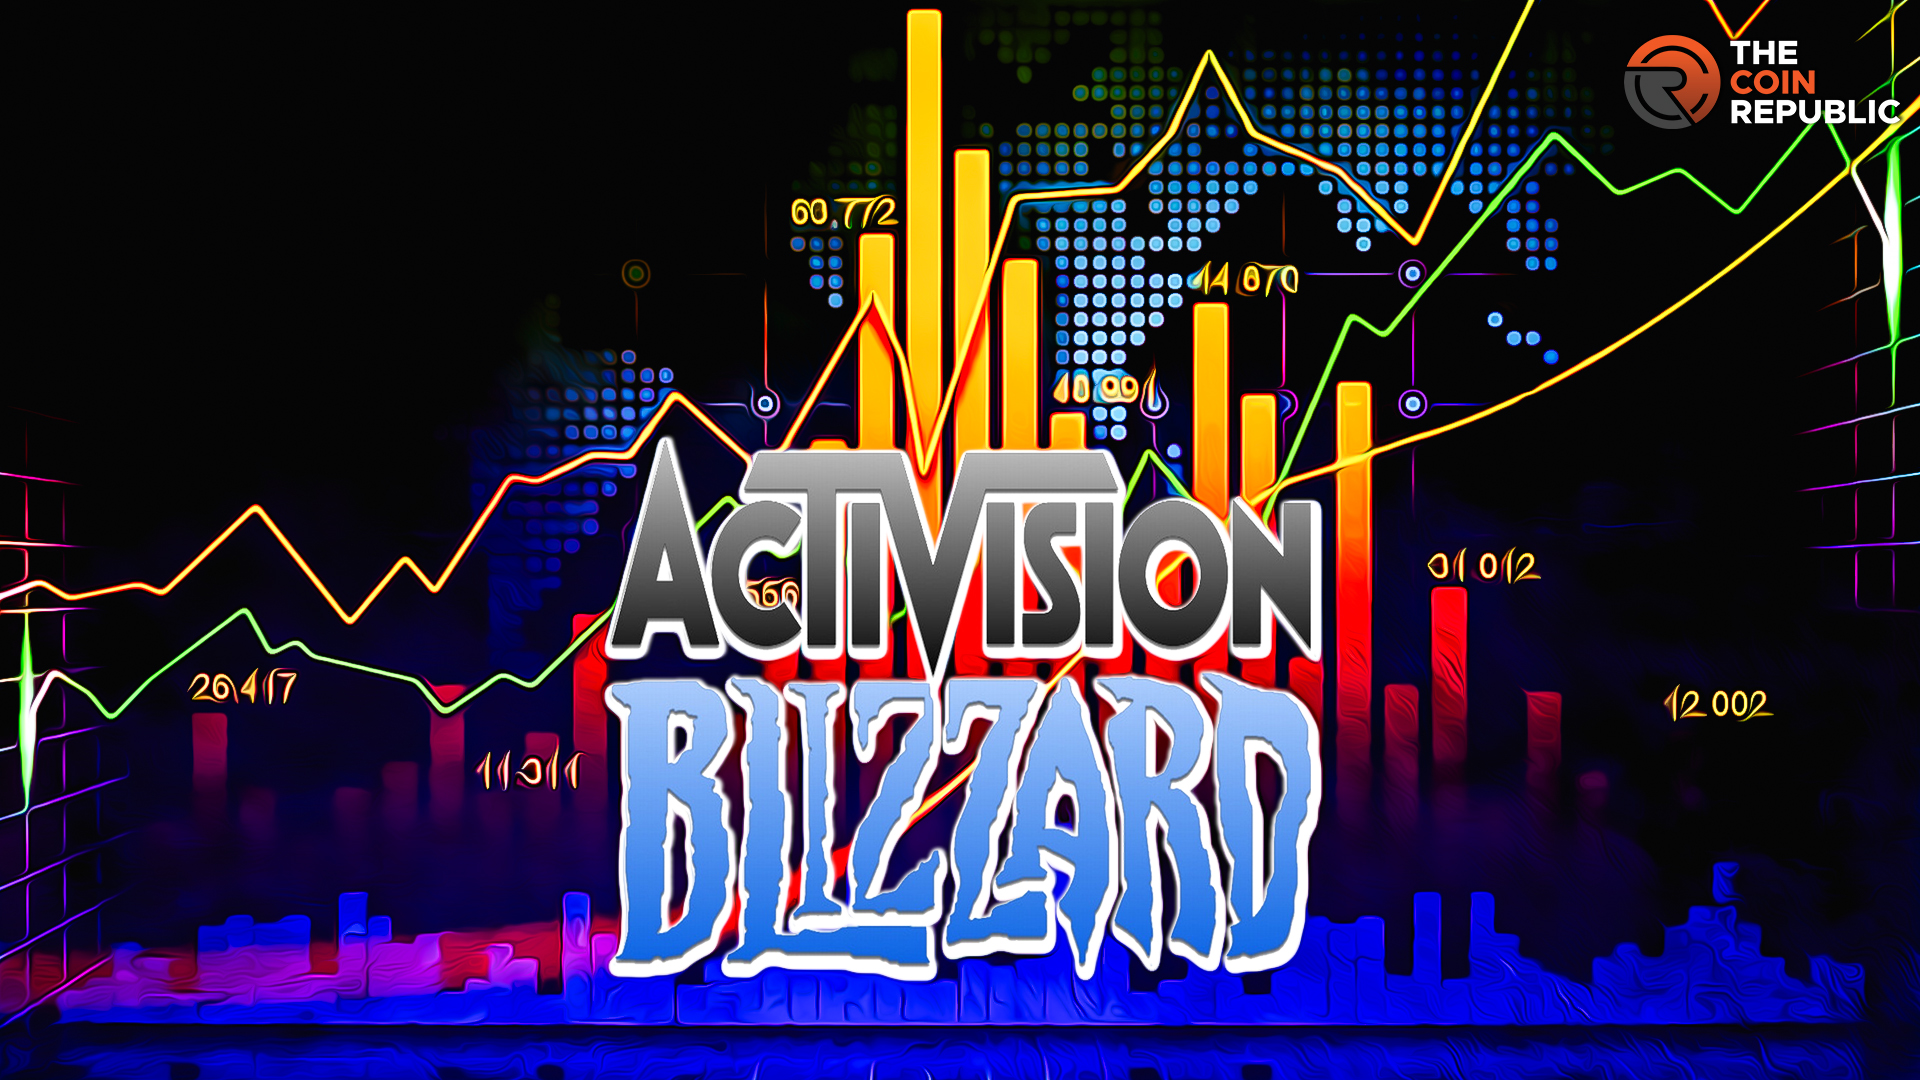 Activision Stock Rises After EU Approves Microsoft Deal